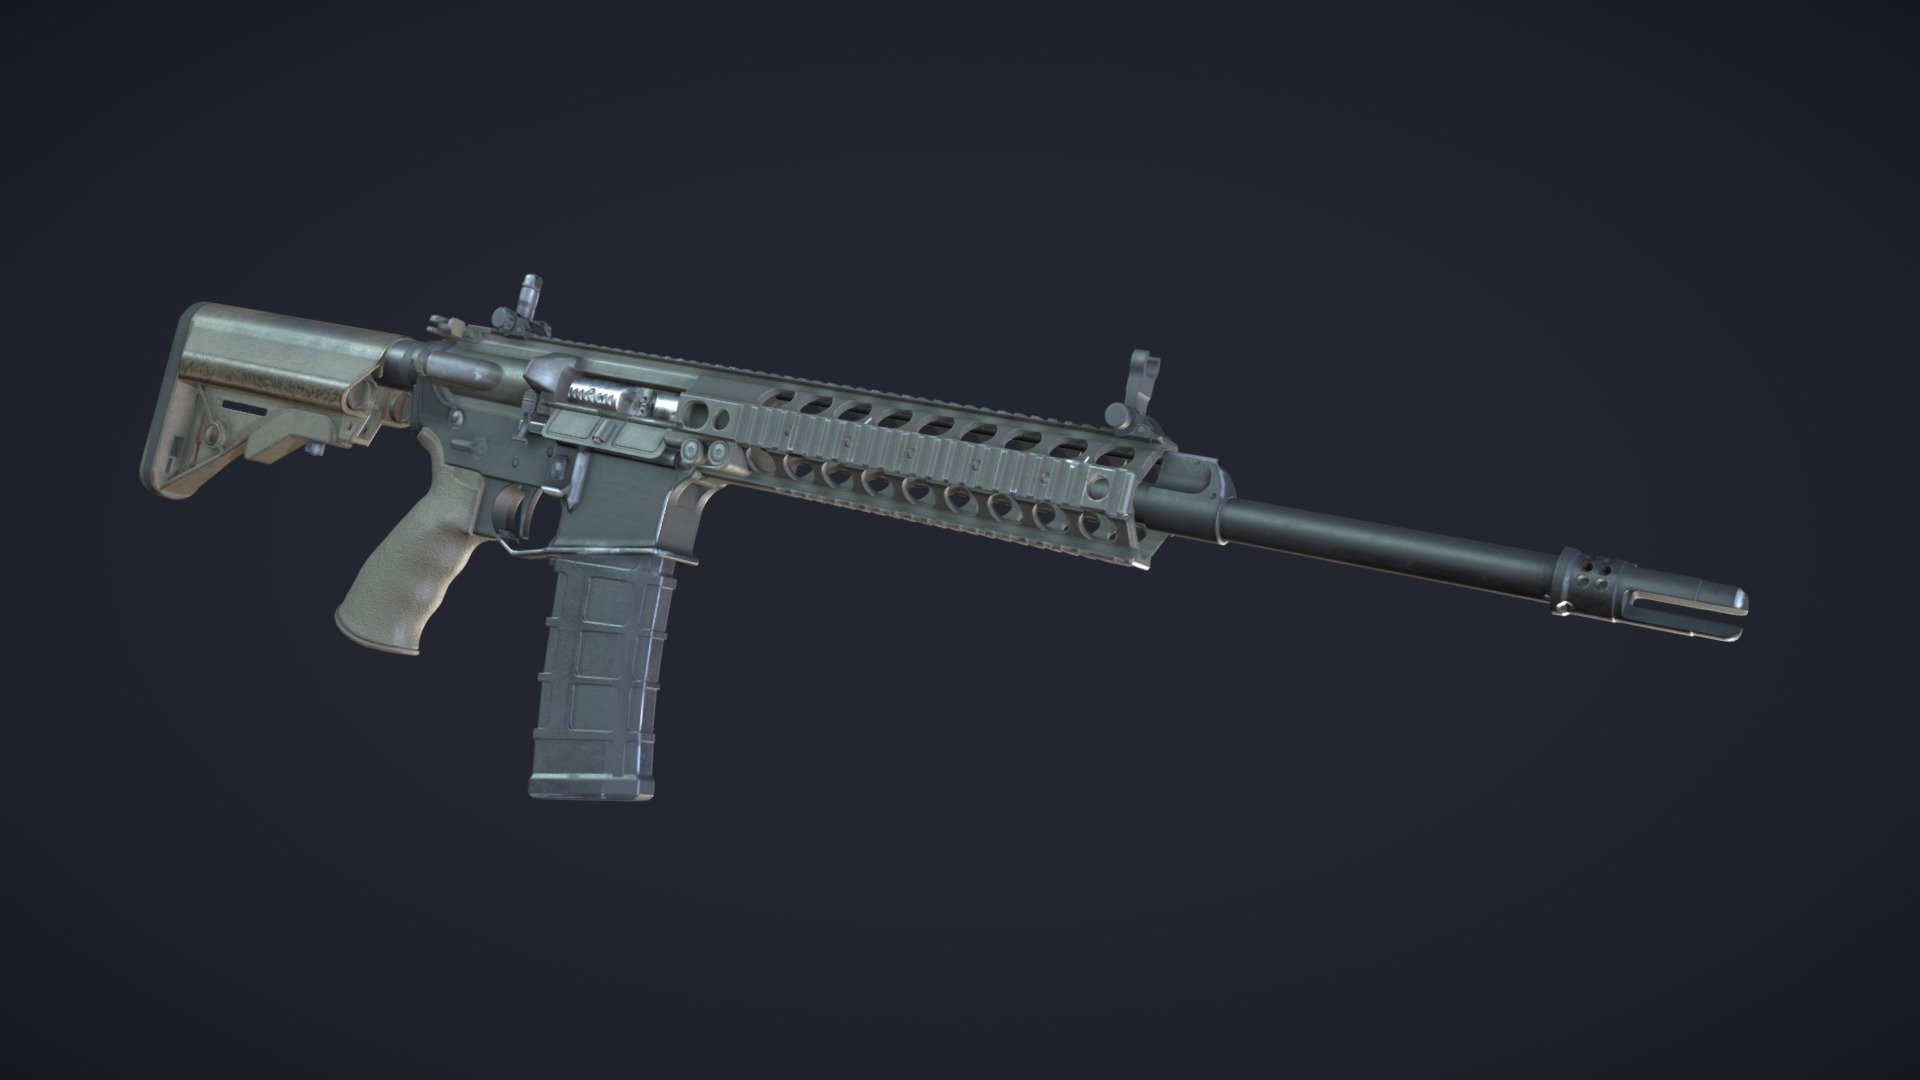 LMT New Zealand Reference Rifle

Not done with the materials yet as I want it to look even more like a gun that's built up from different parts 3d model